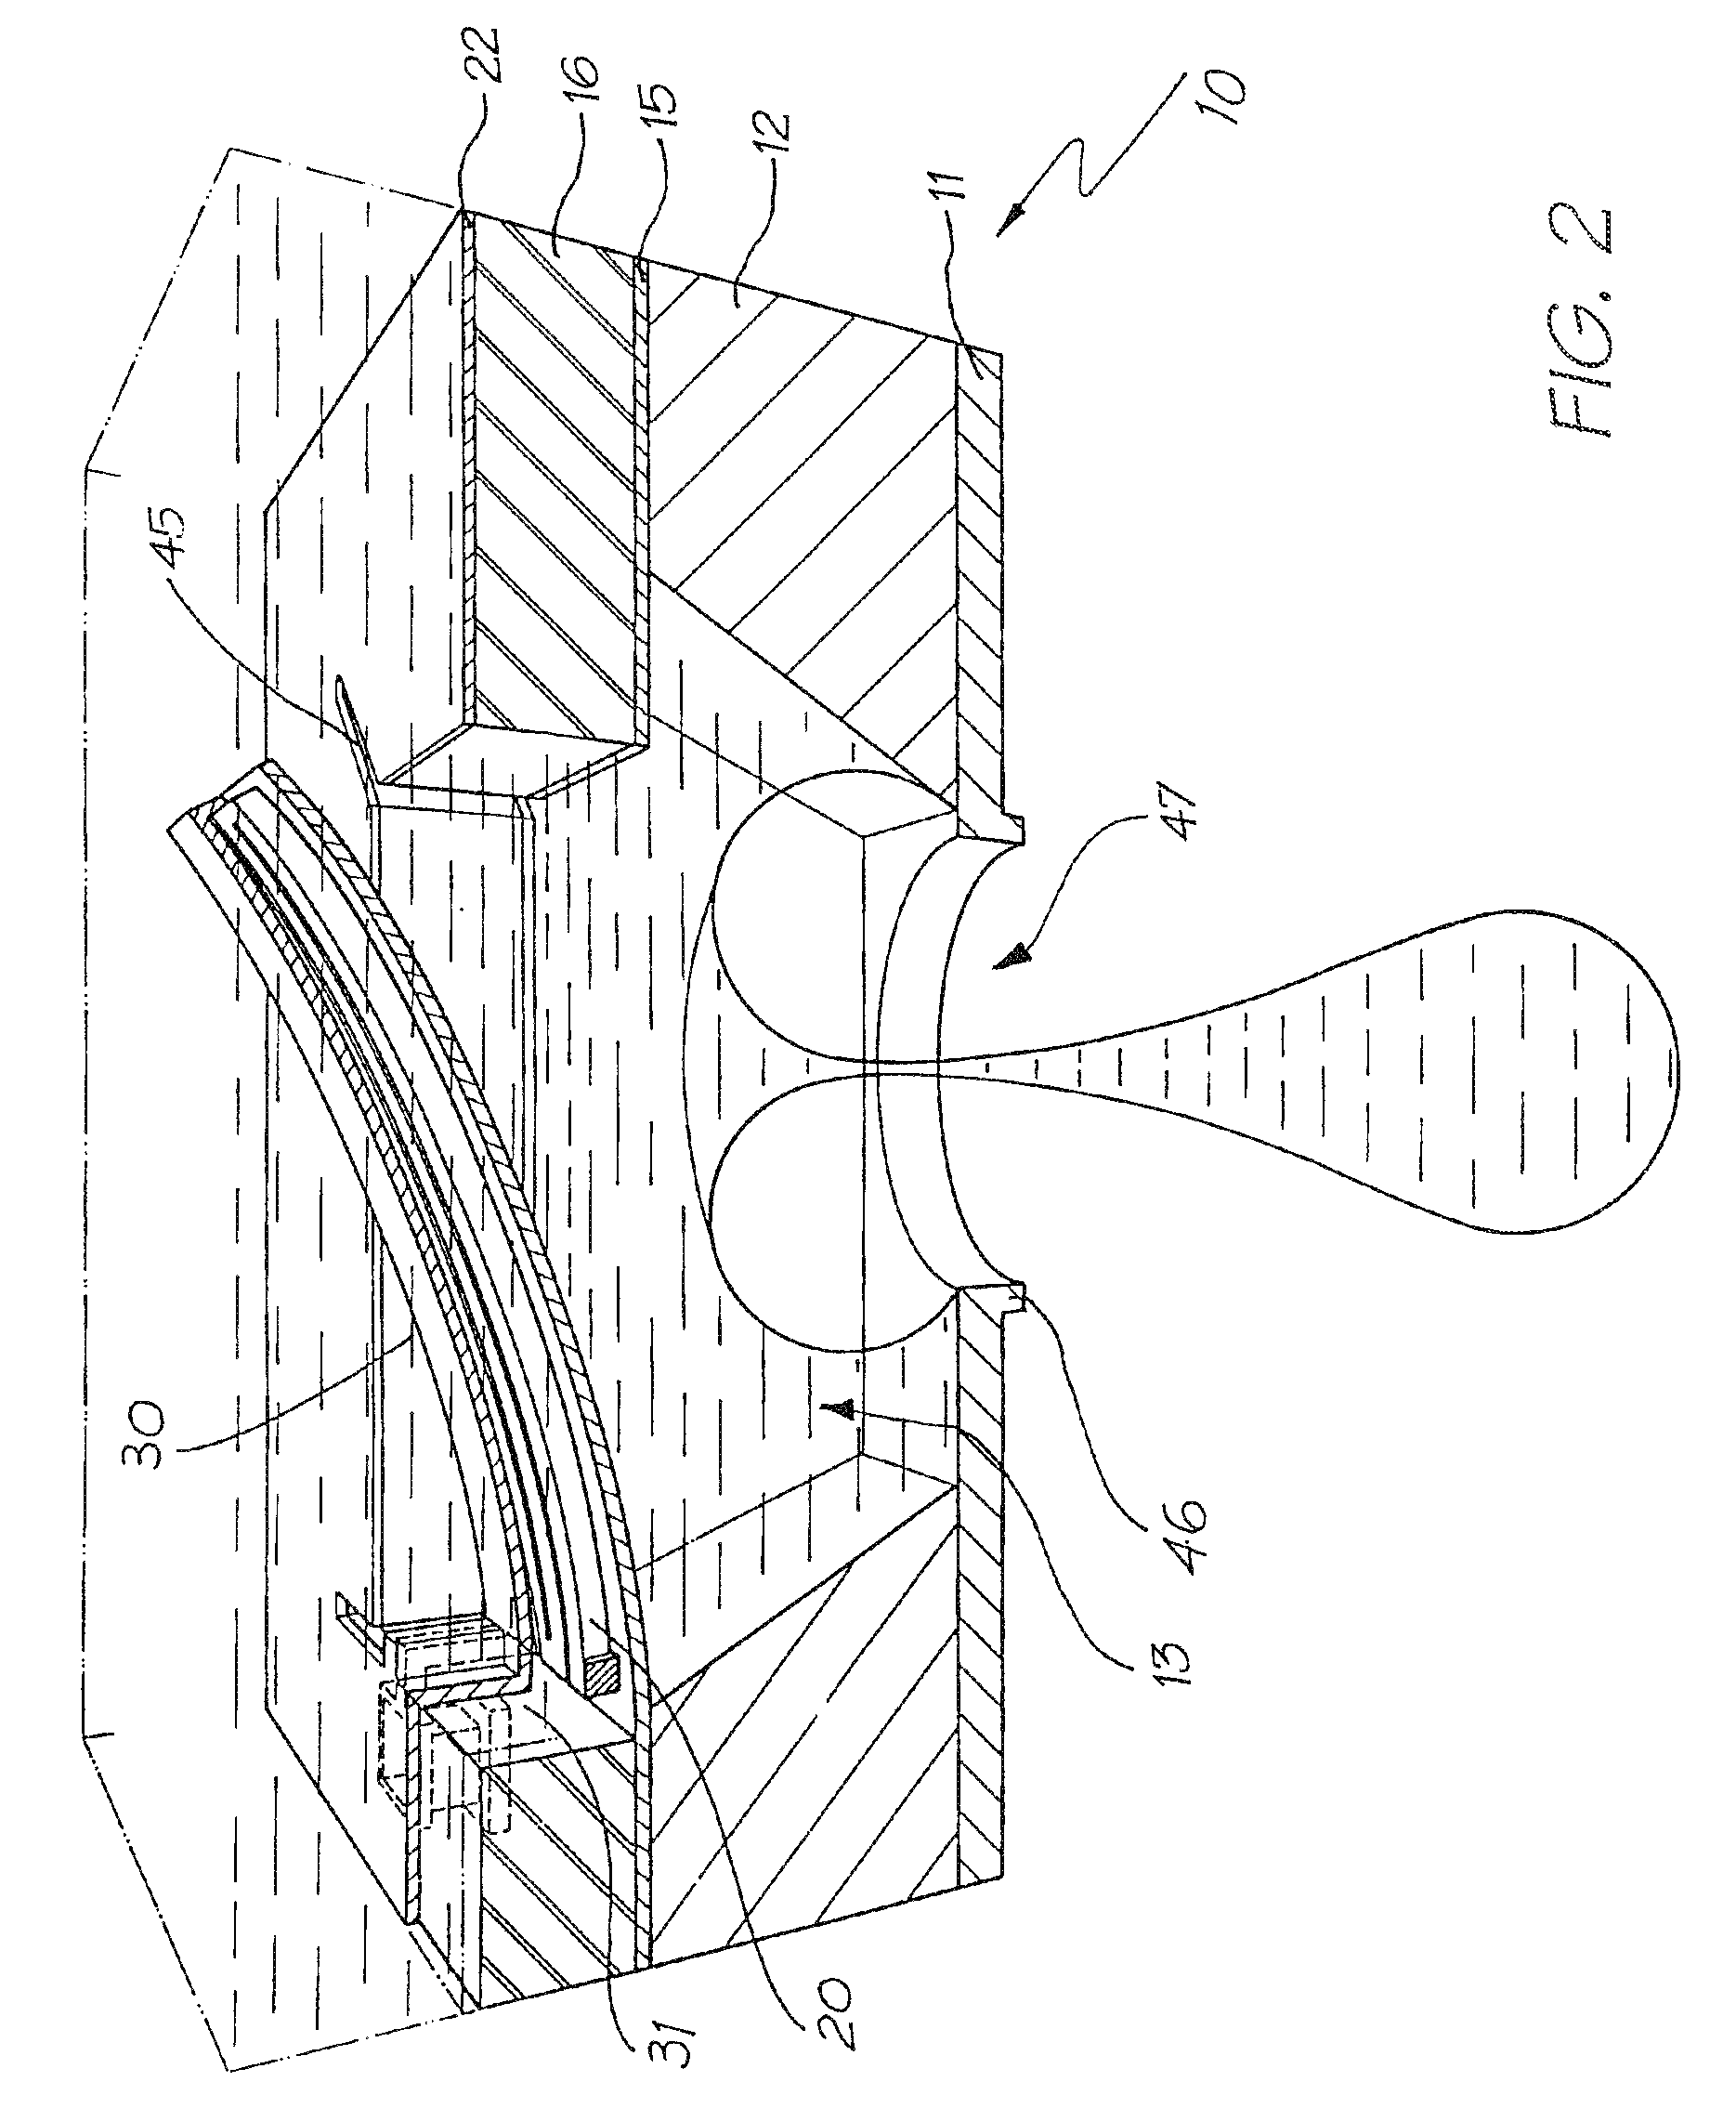 Printhead Integrated Circuit With Small Nozzle Apertures